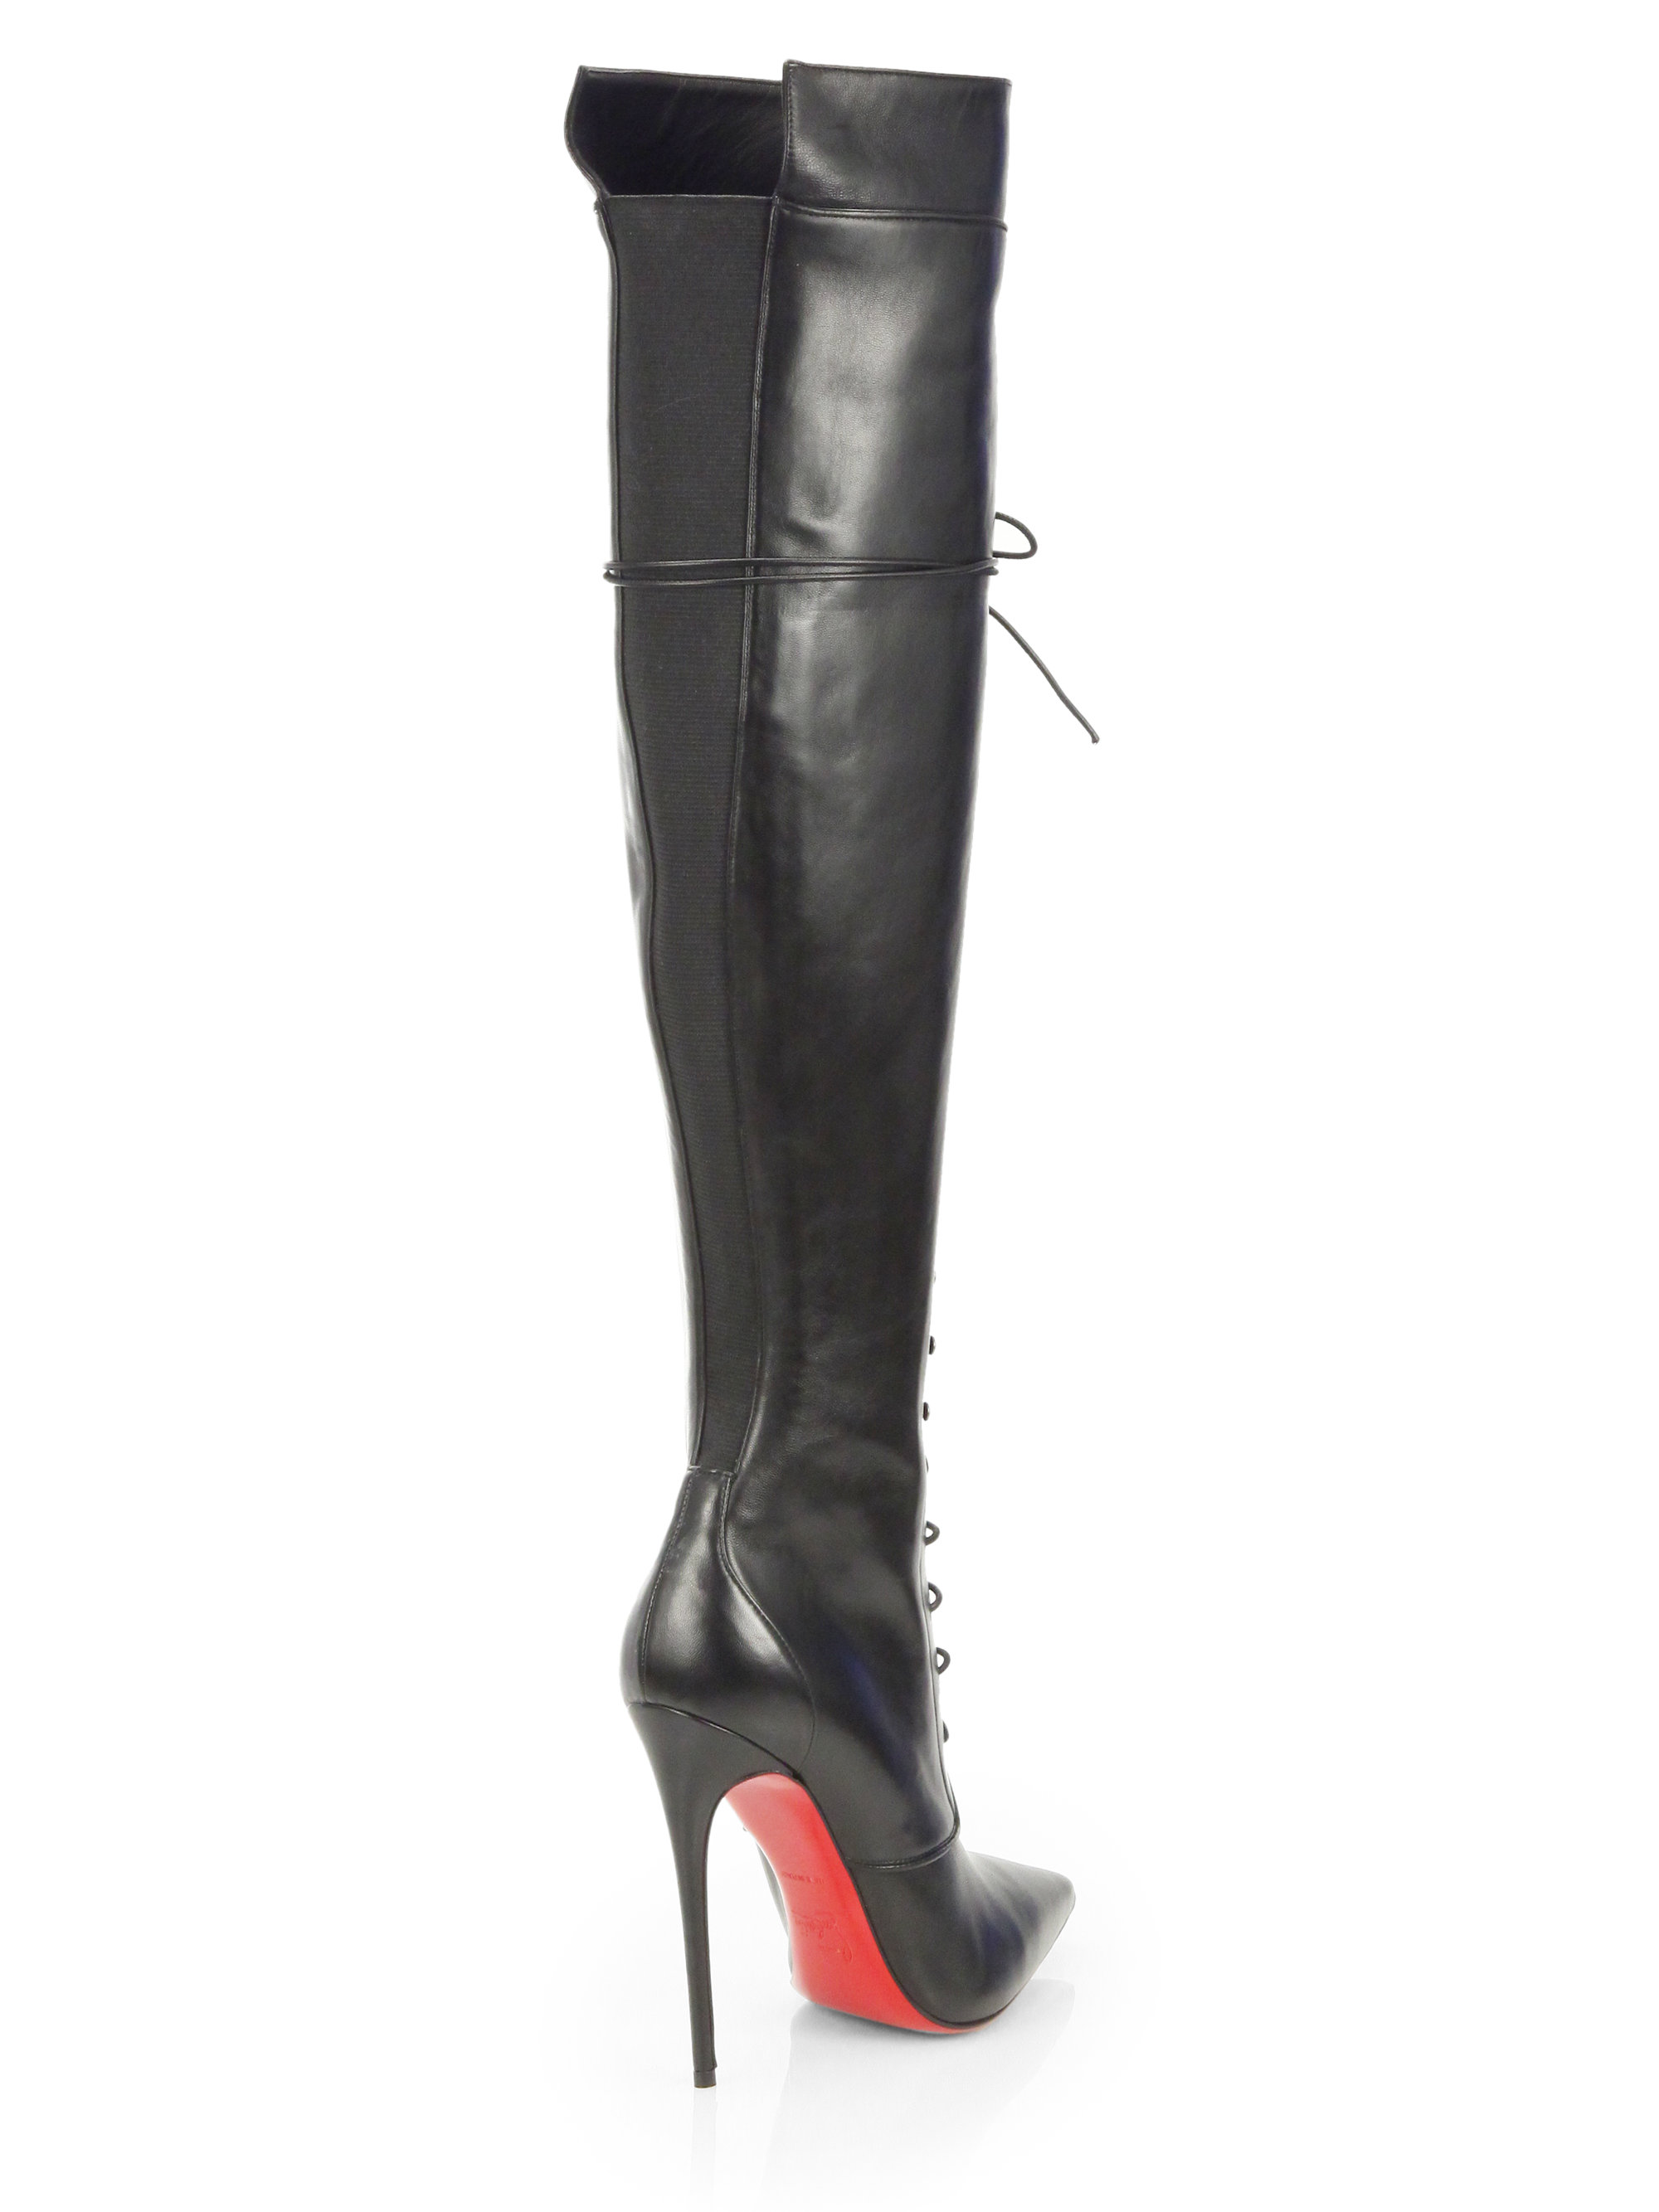 Christian Louboutin Mado Leather Lace-up Over the knee Boots in Black | Lyst